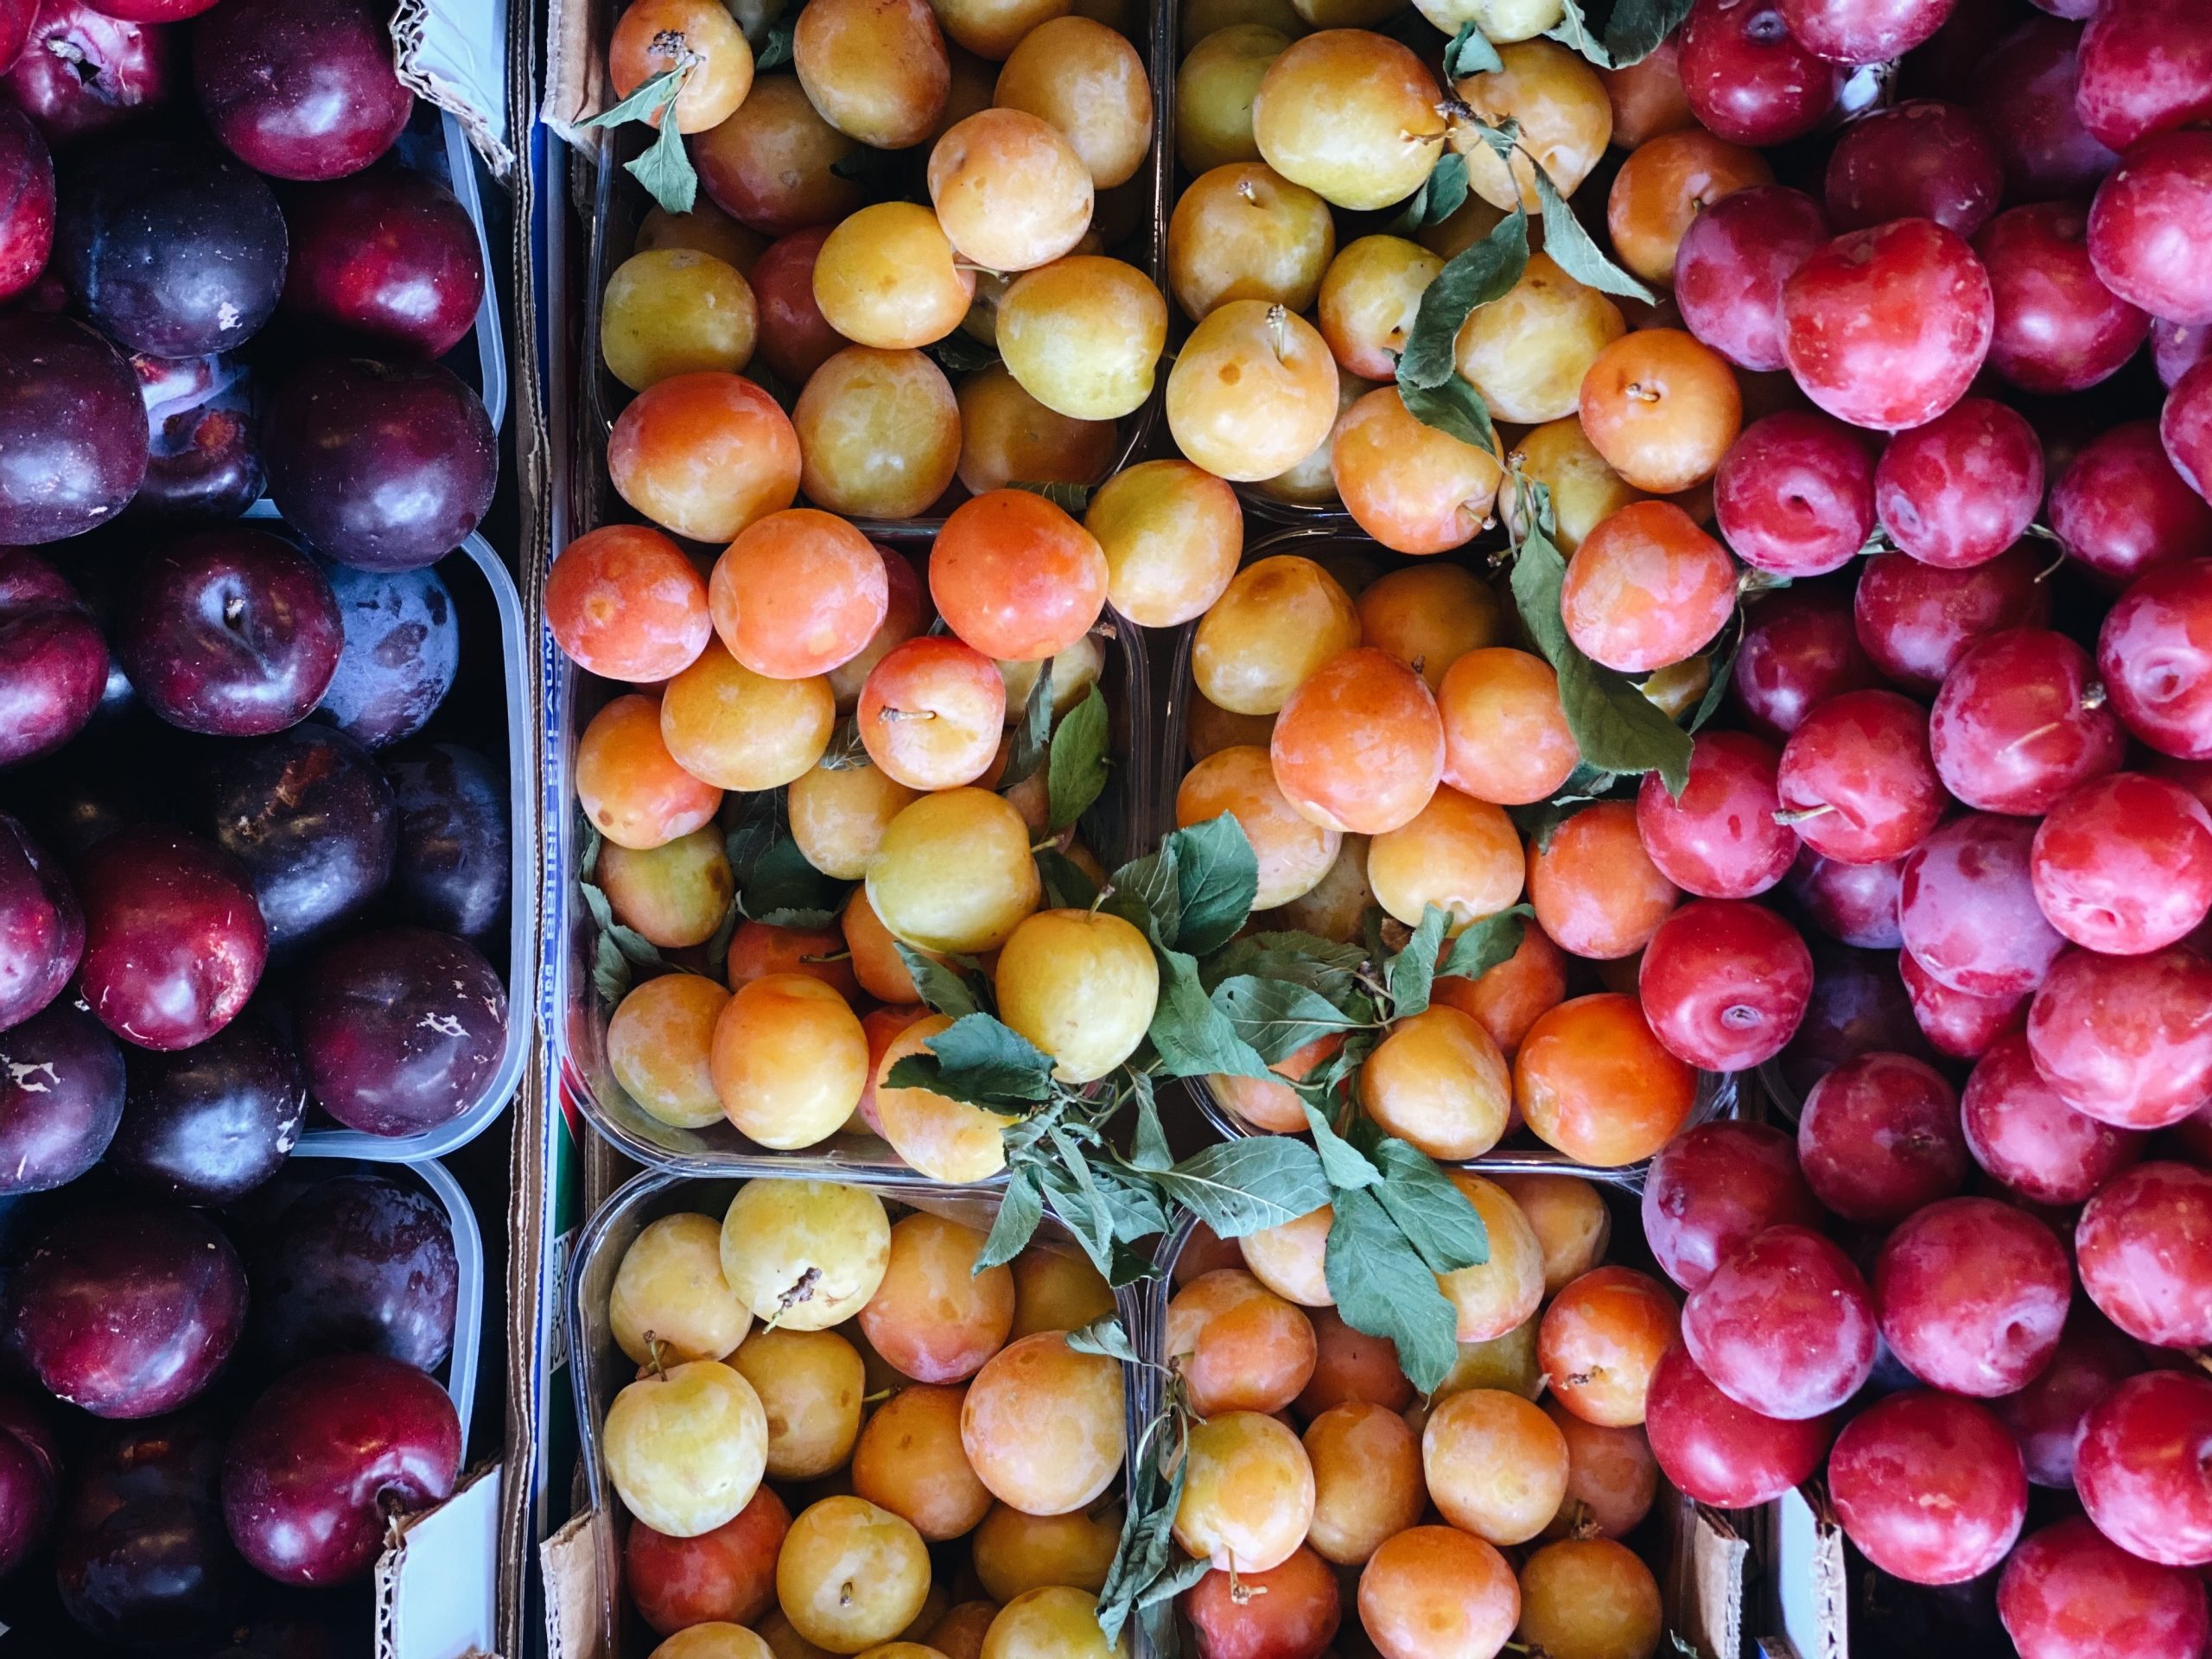 Freshly picked and colourful plums on display at Panzer's Deli